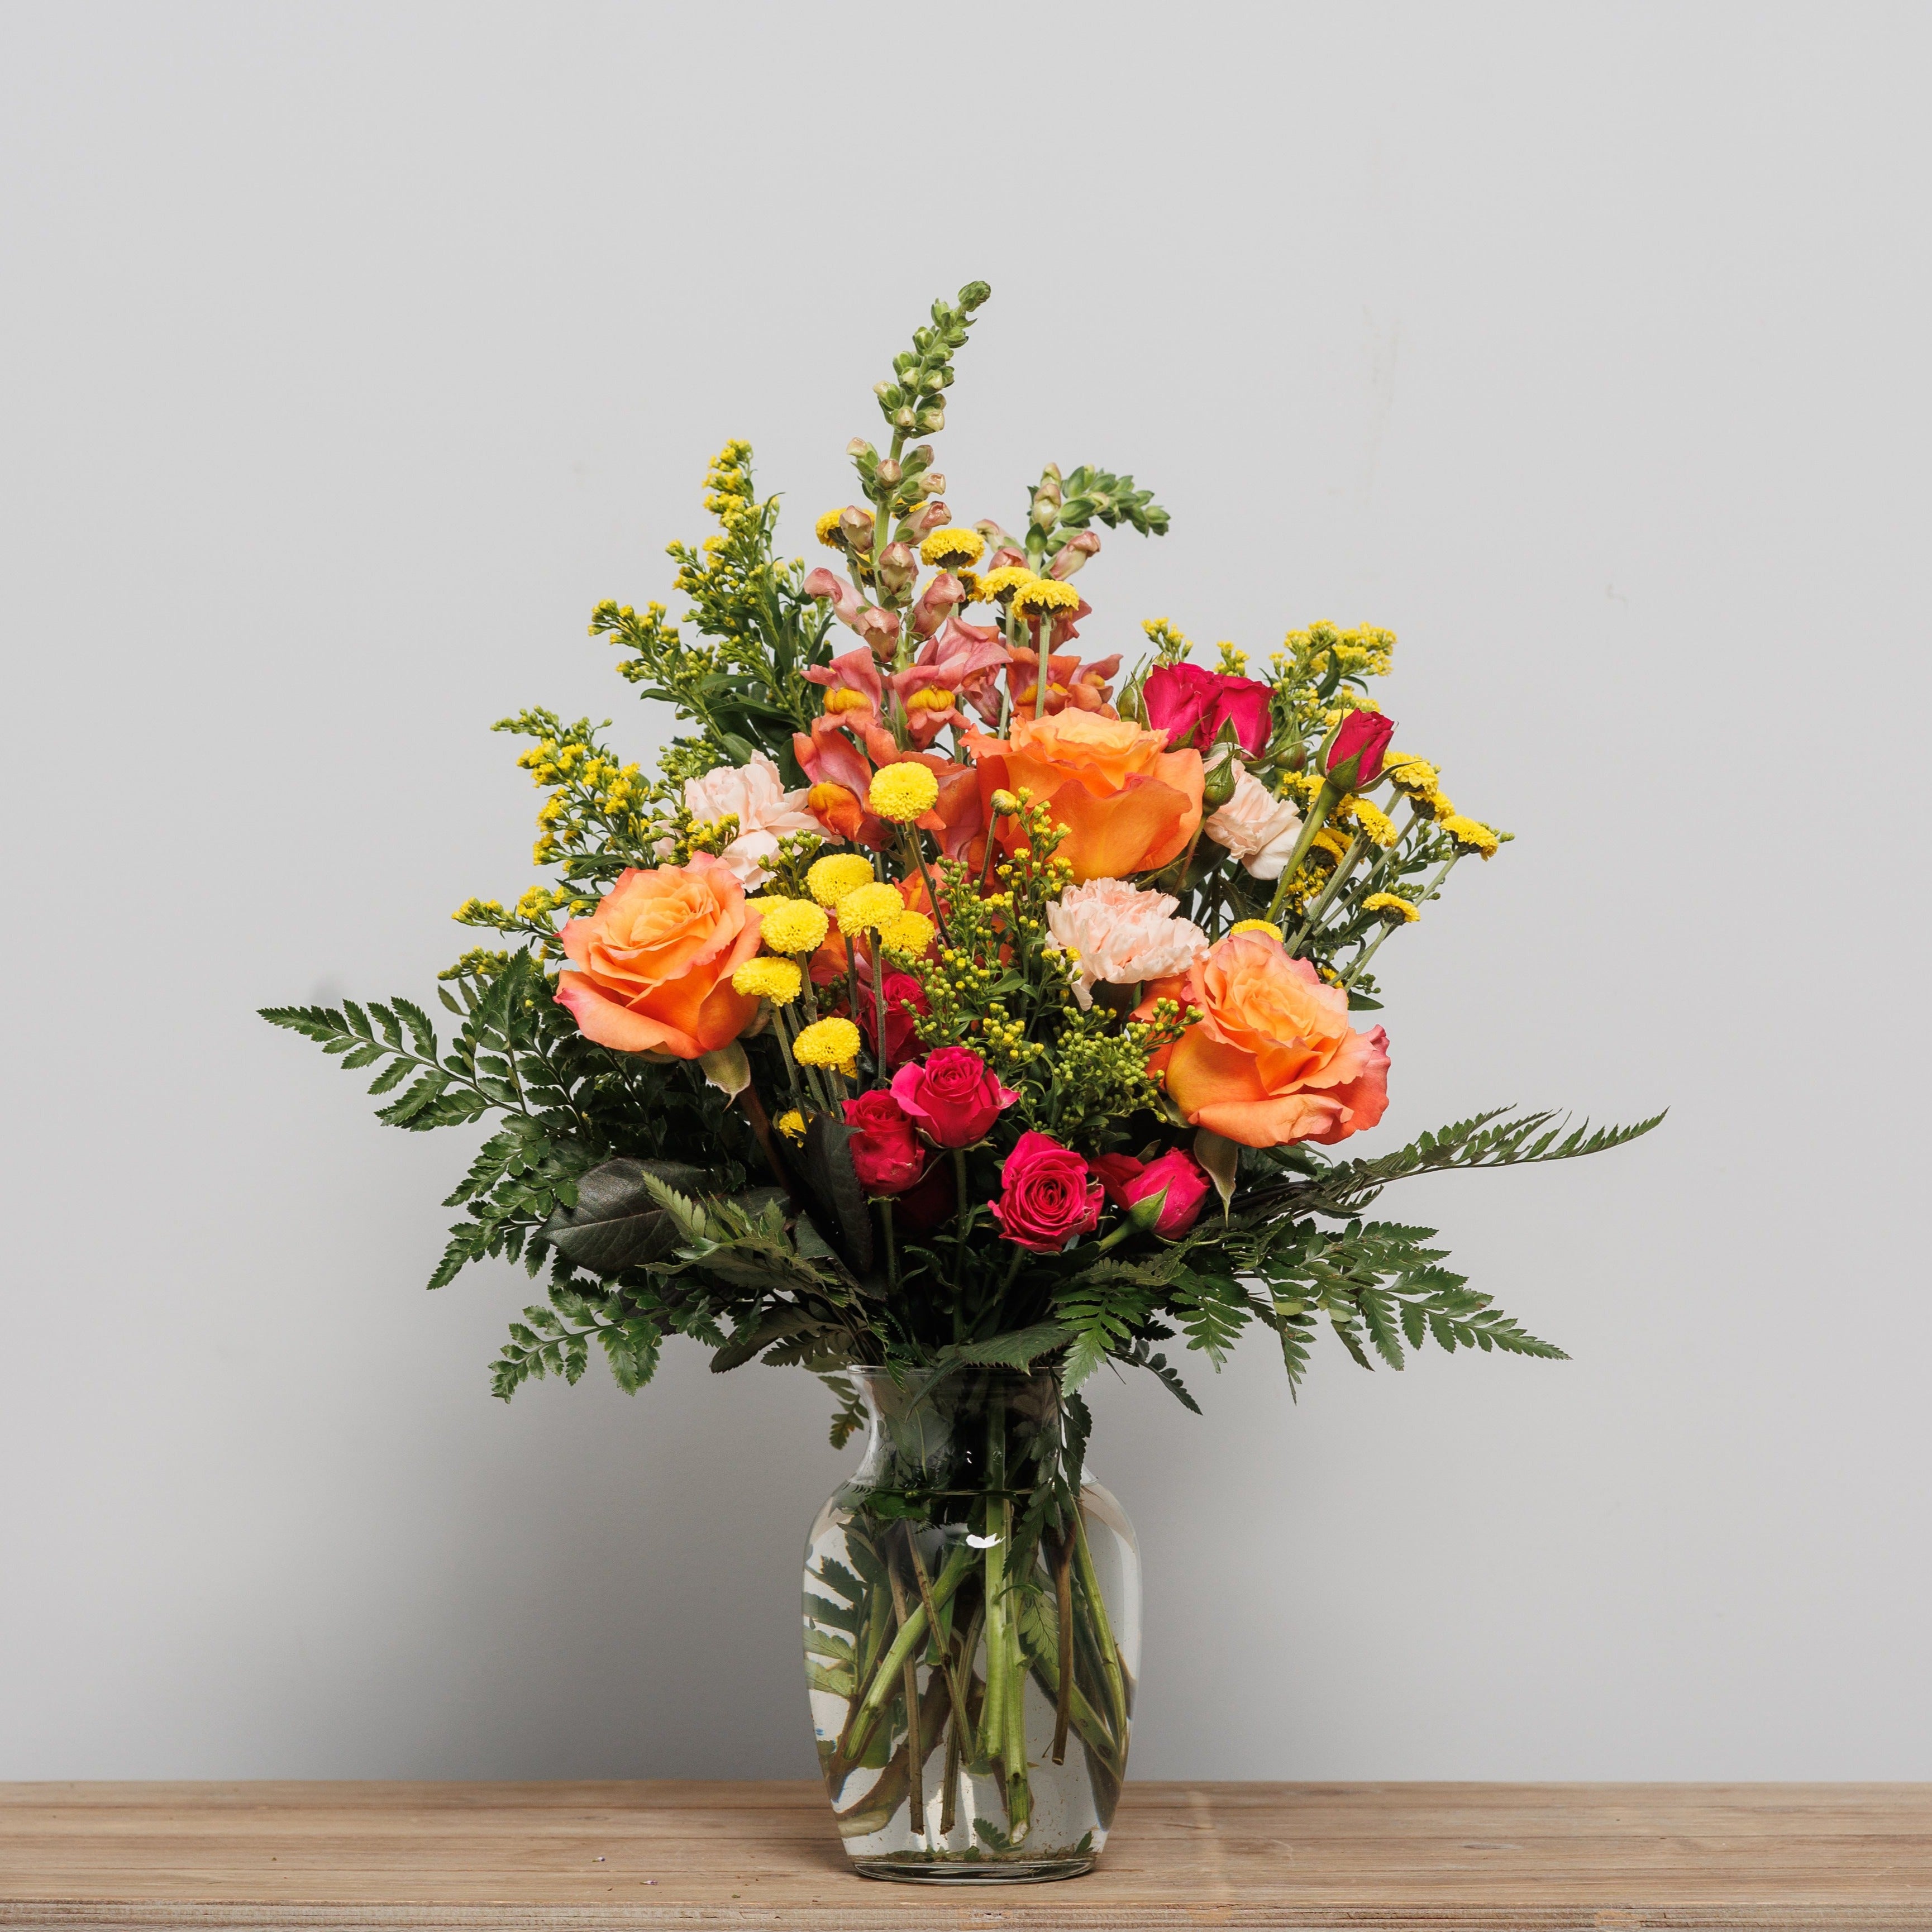 A bright flower arrangement with orange roses, yellow mums and pink snapdragons.